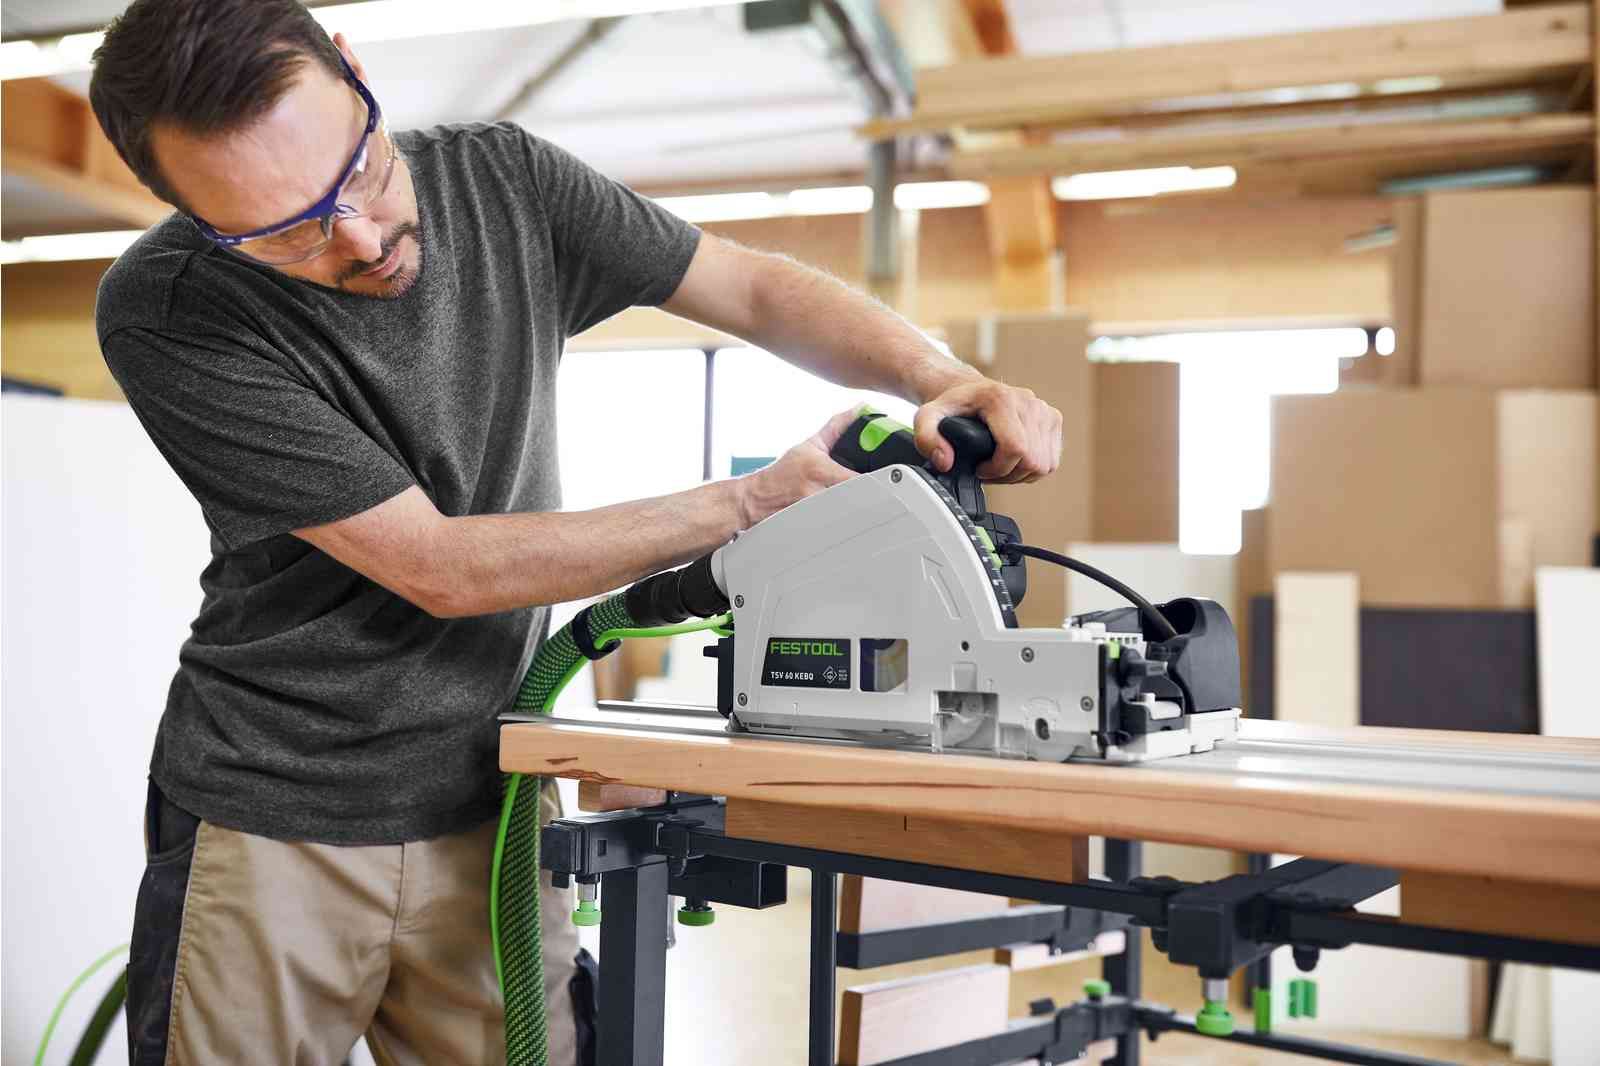 TSV 60K 168mm Plunge Cut Scoring Saw in Systainer with 1900mm Rail 577745 by Festool